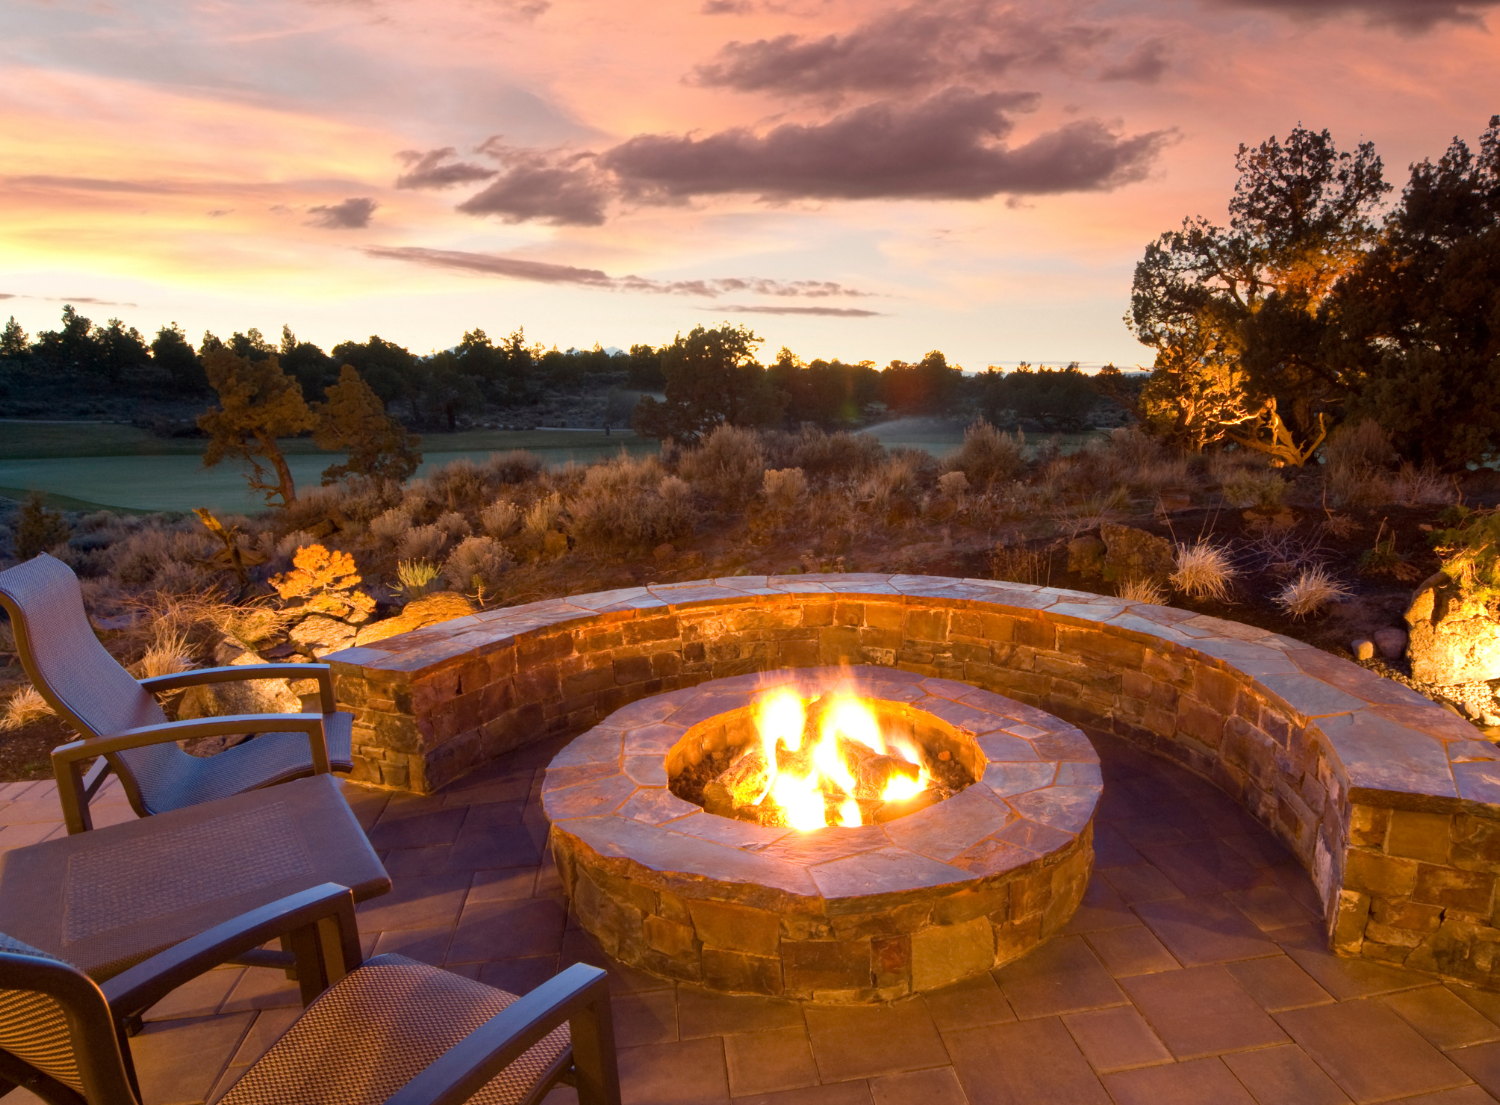 How to Safely Build a Fire Pit on Your Deck